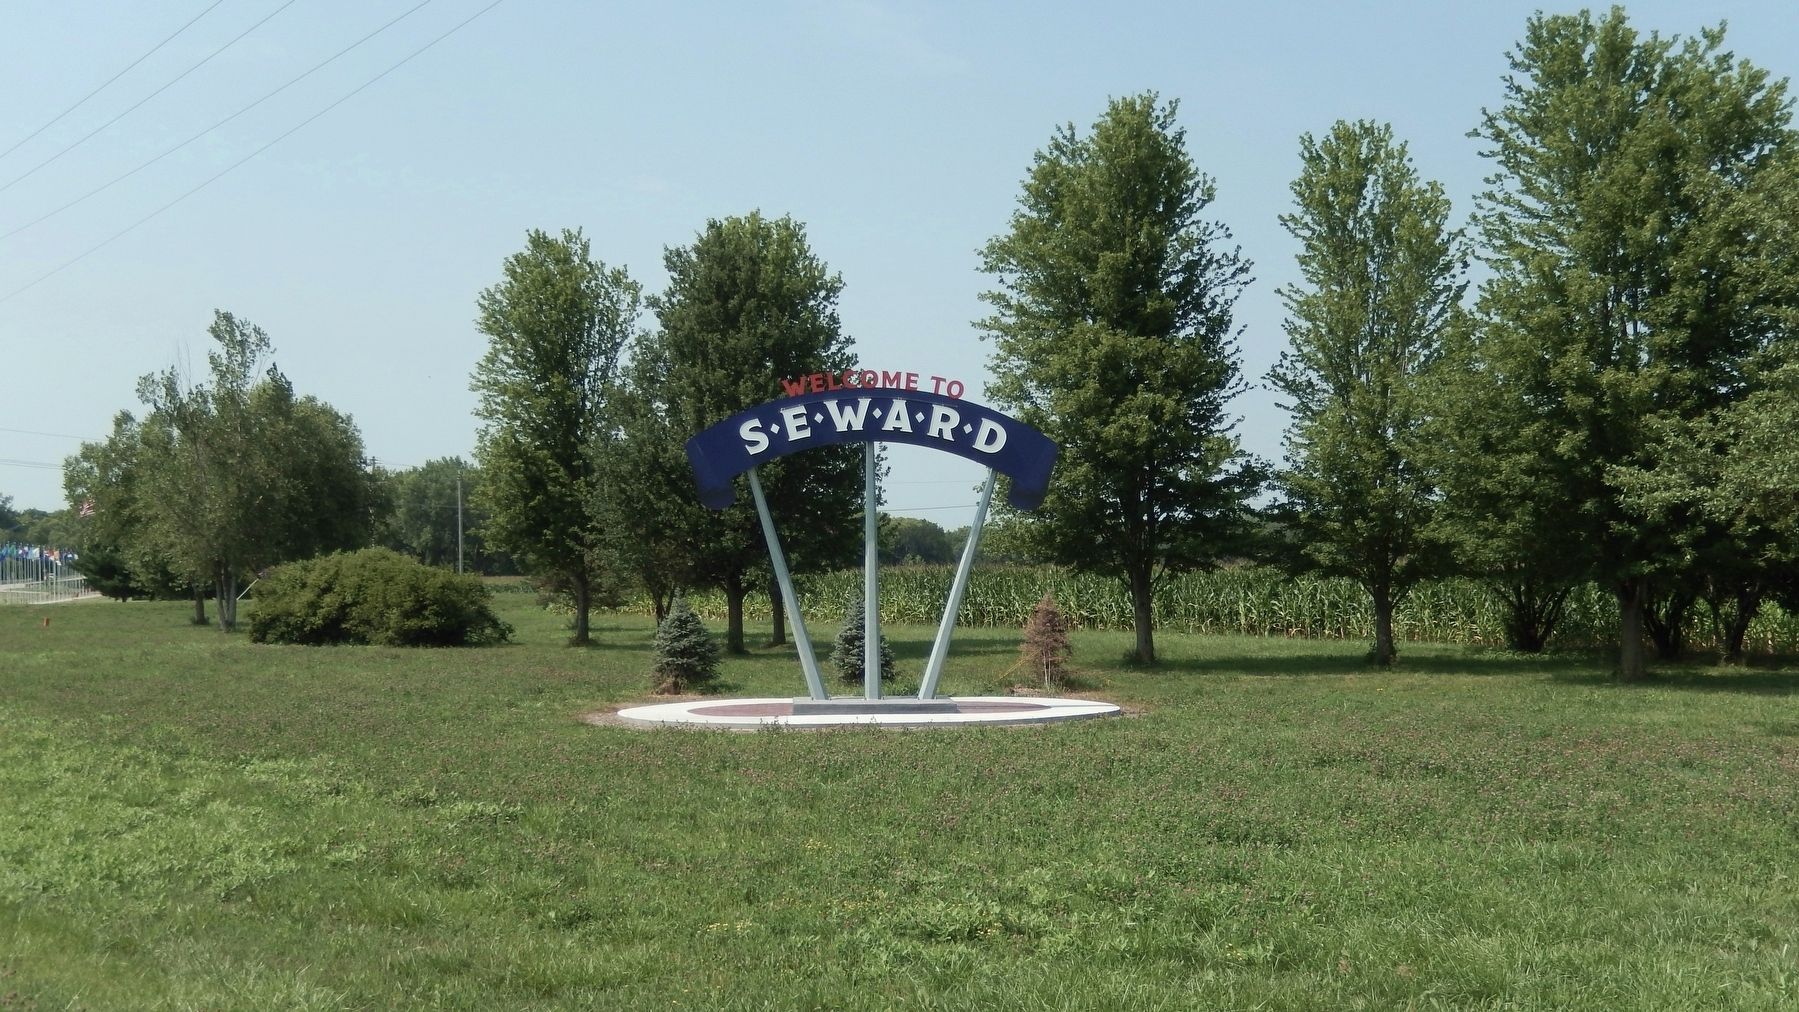 Welcome to Seward Sign, August 12, 2021 image. Click for full size.